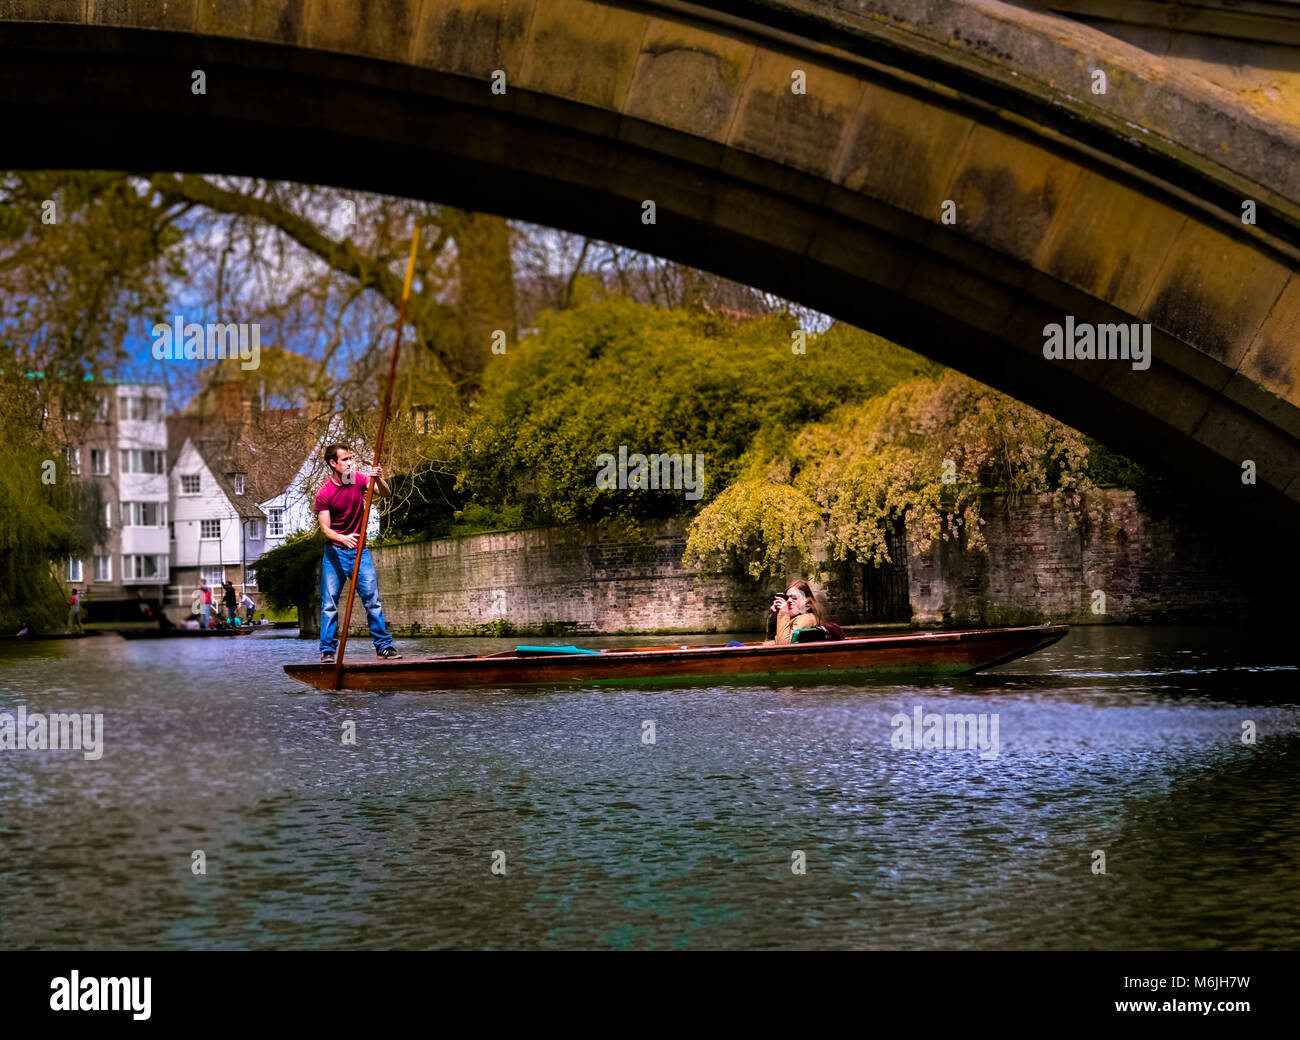 Things to do when in Cambridge - Definitely go for punting if weather is good Stock Photo